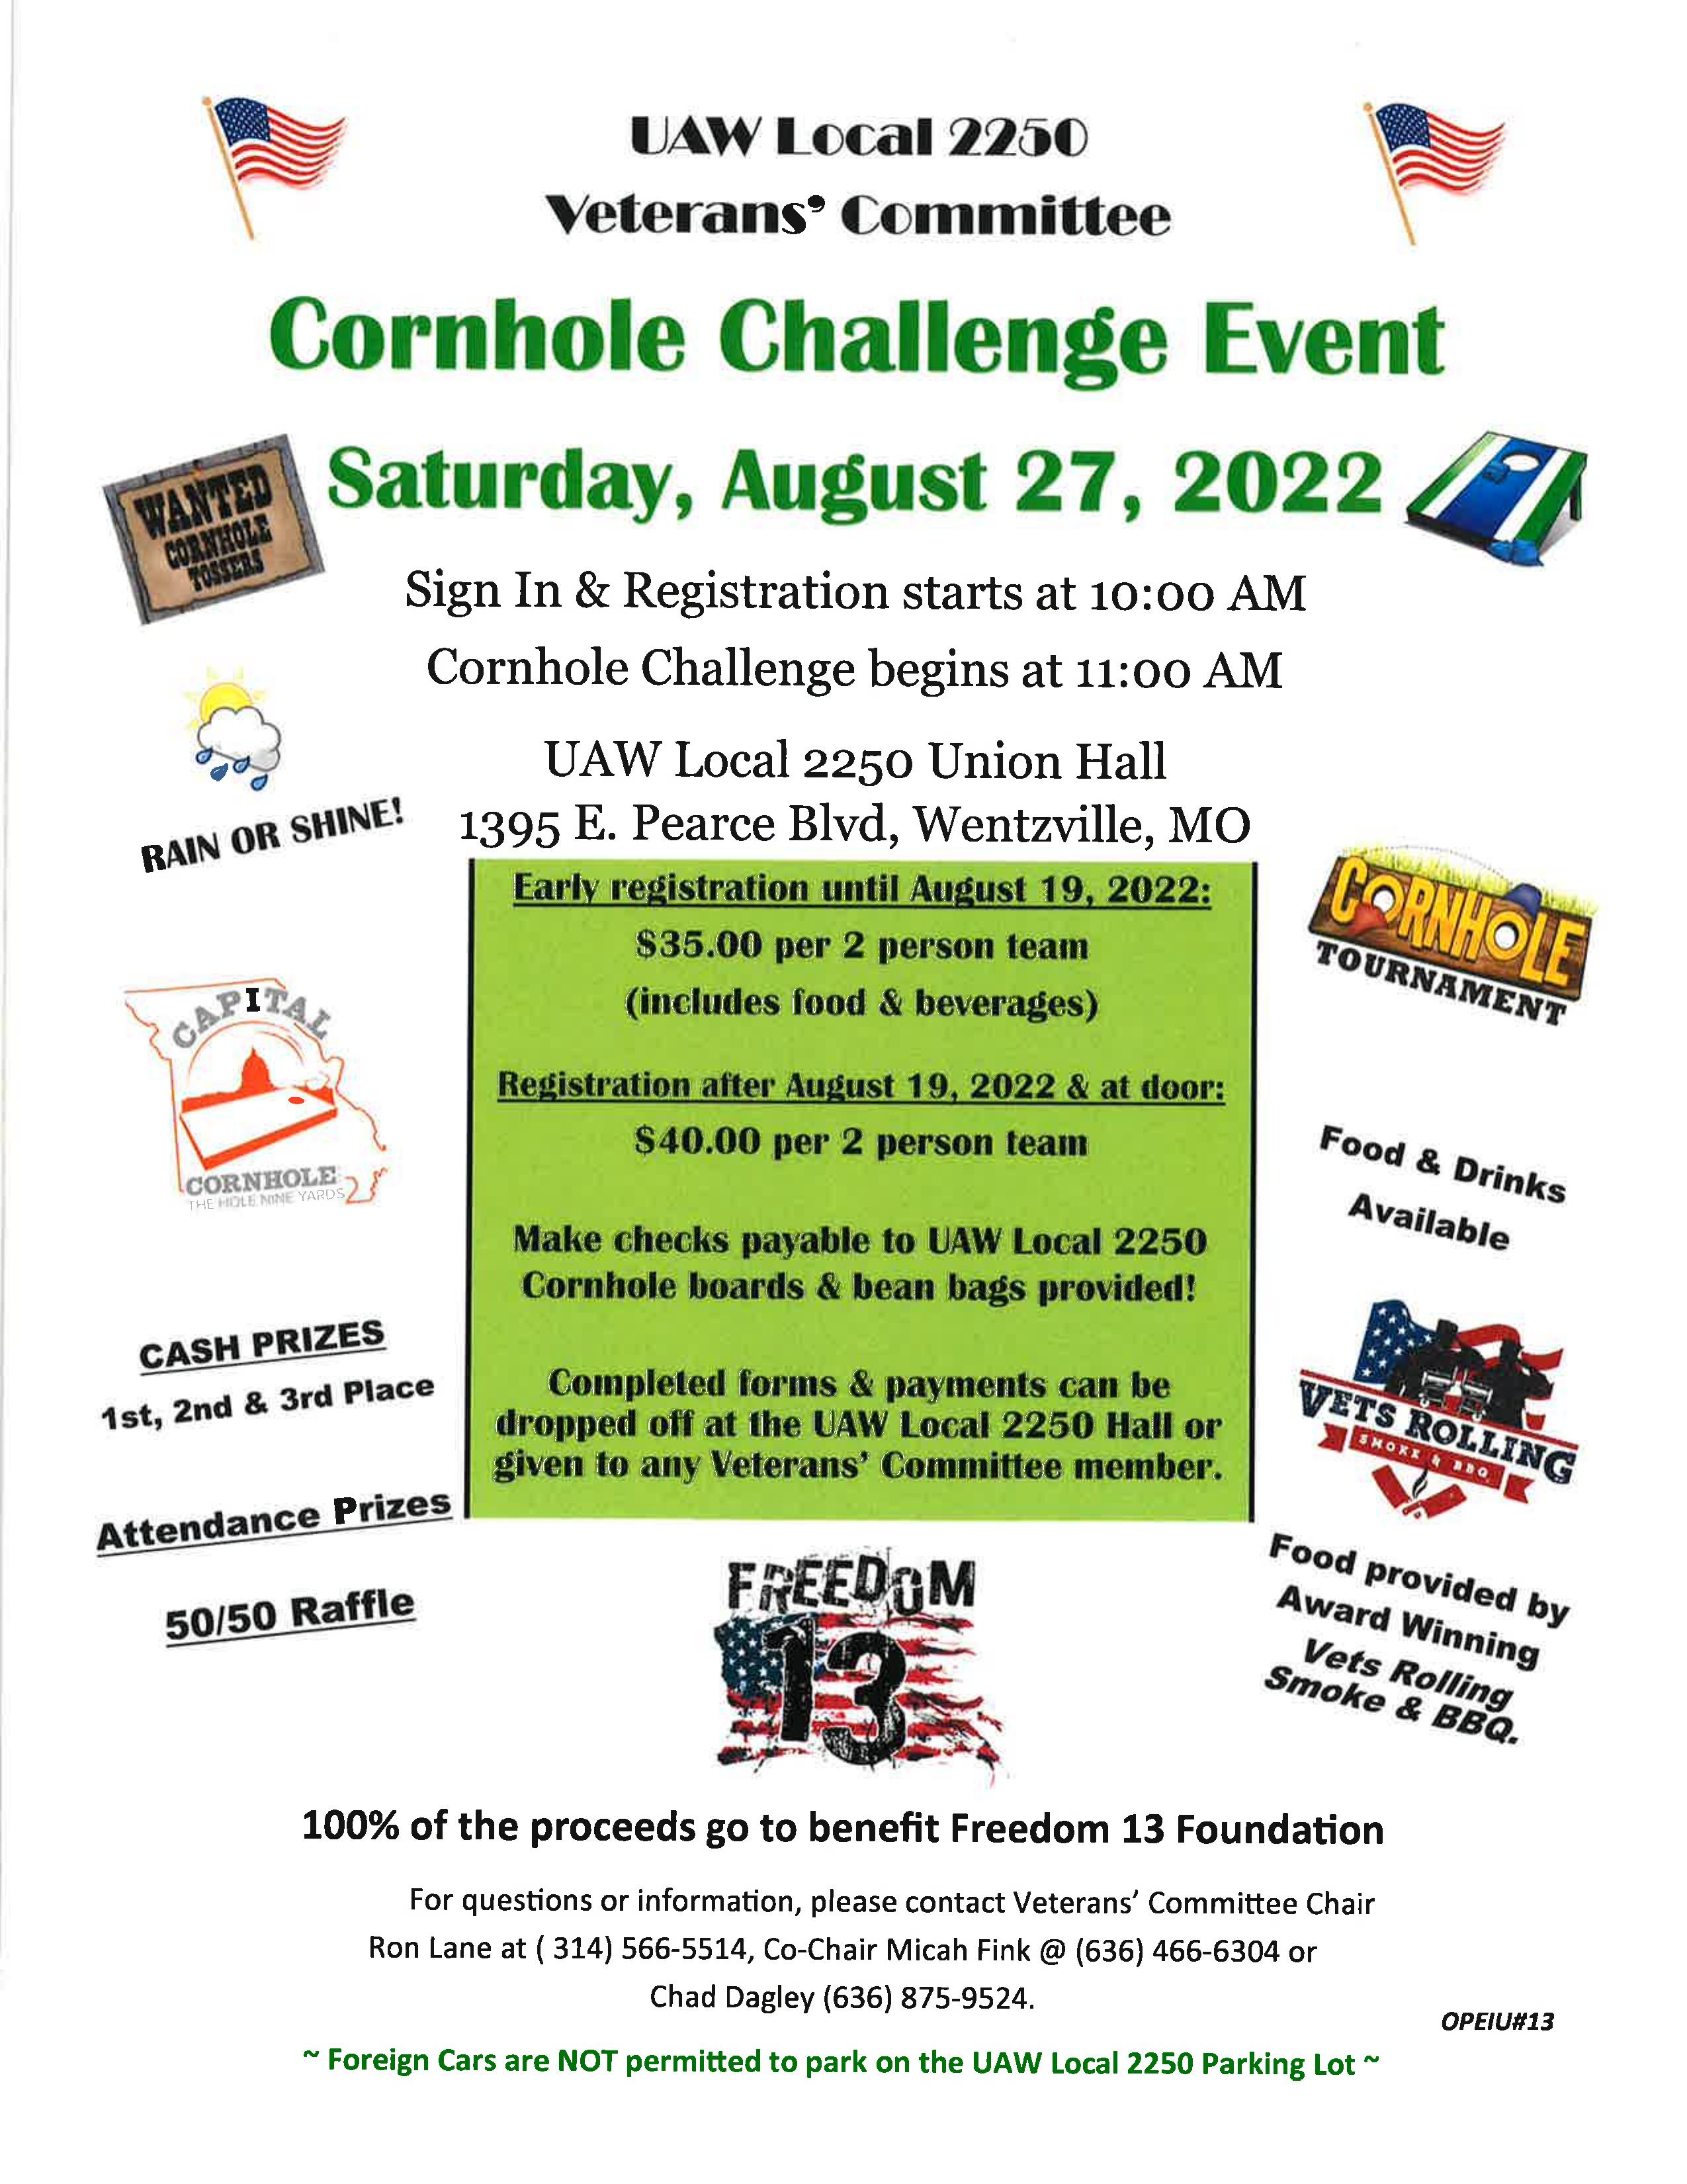 Ready For The Cornhole Challenge?